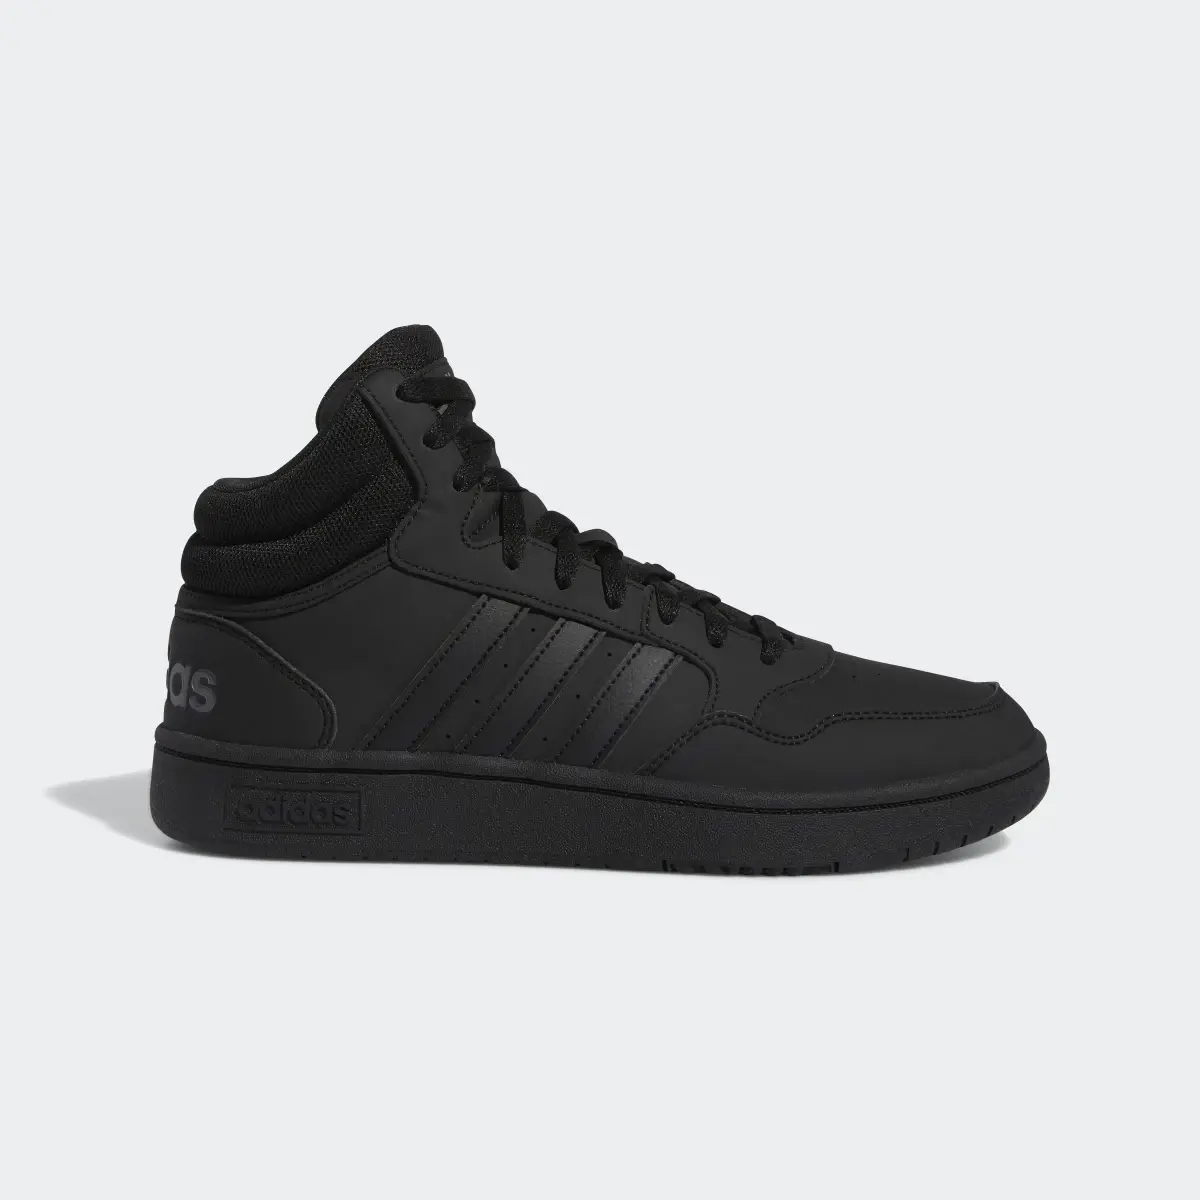 Adidas Hoops 3 Mid Lifestyle Basketball Mid Classic Shoes. 2